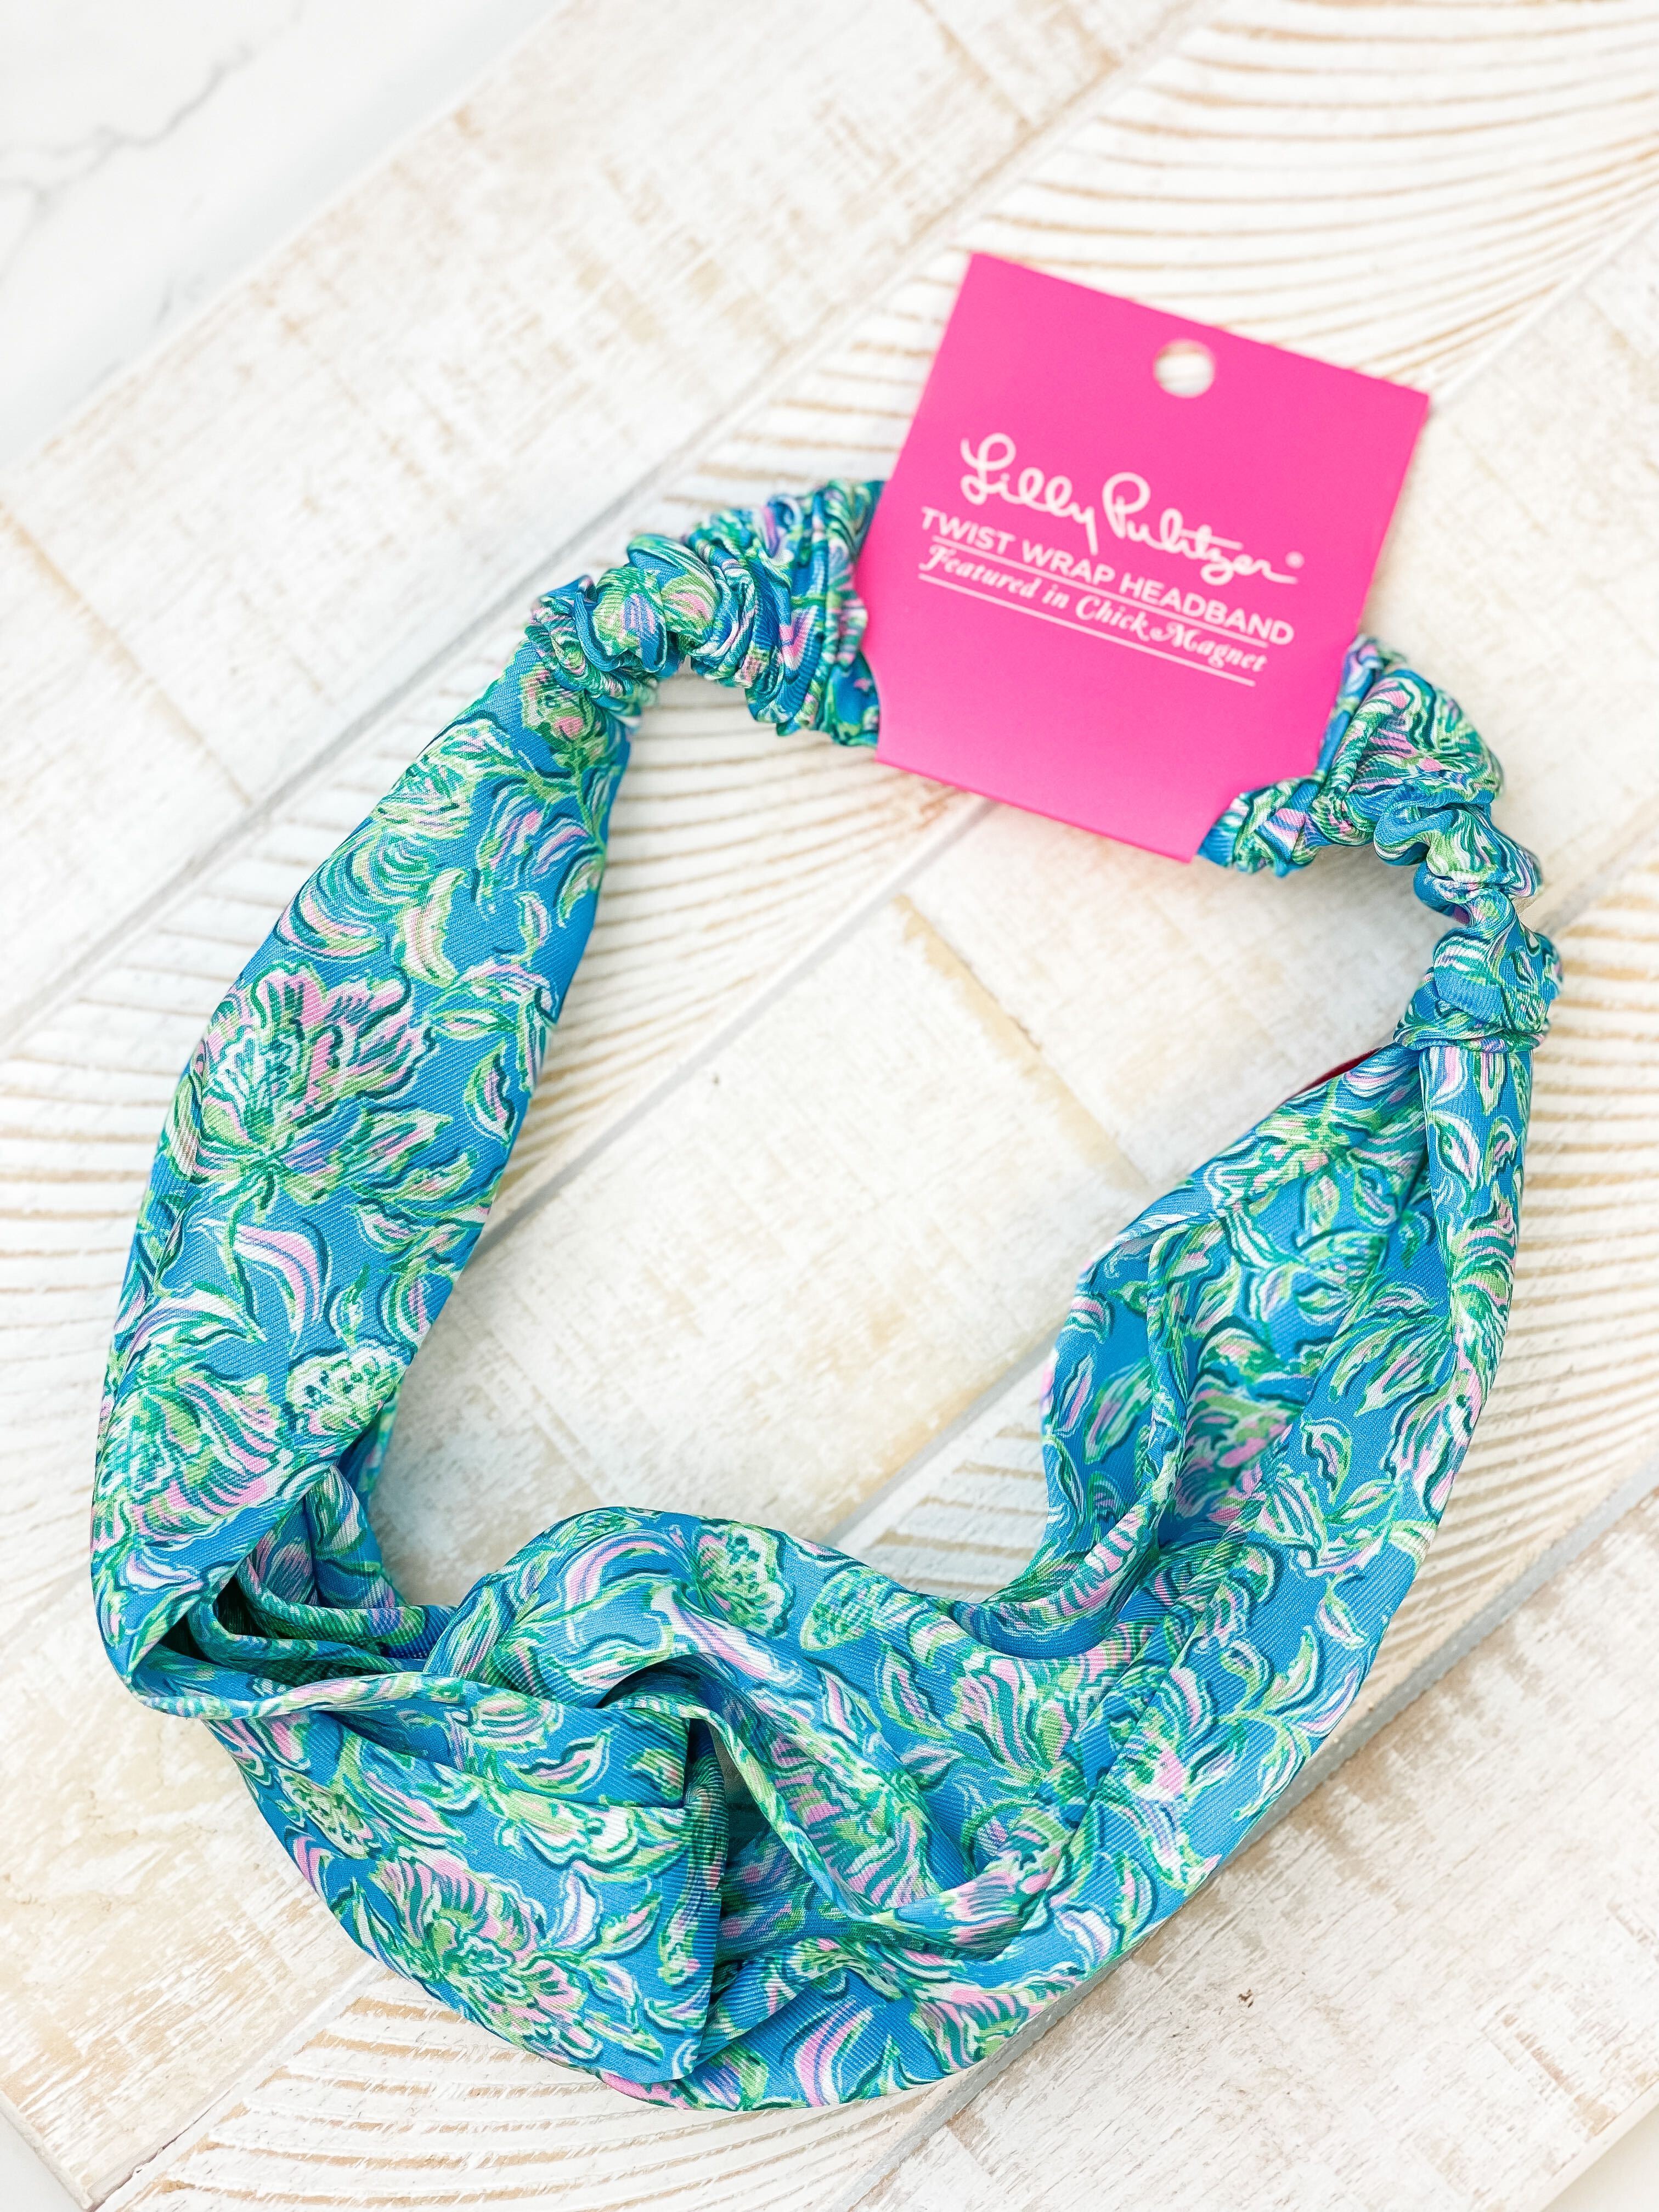 Twist Wrap Headband by Lilly Pulitzer - Chick Magnet